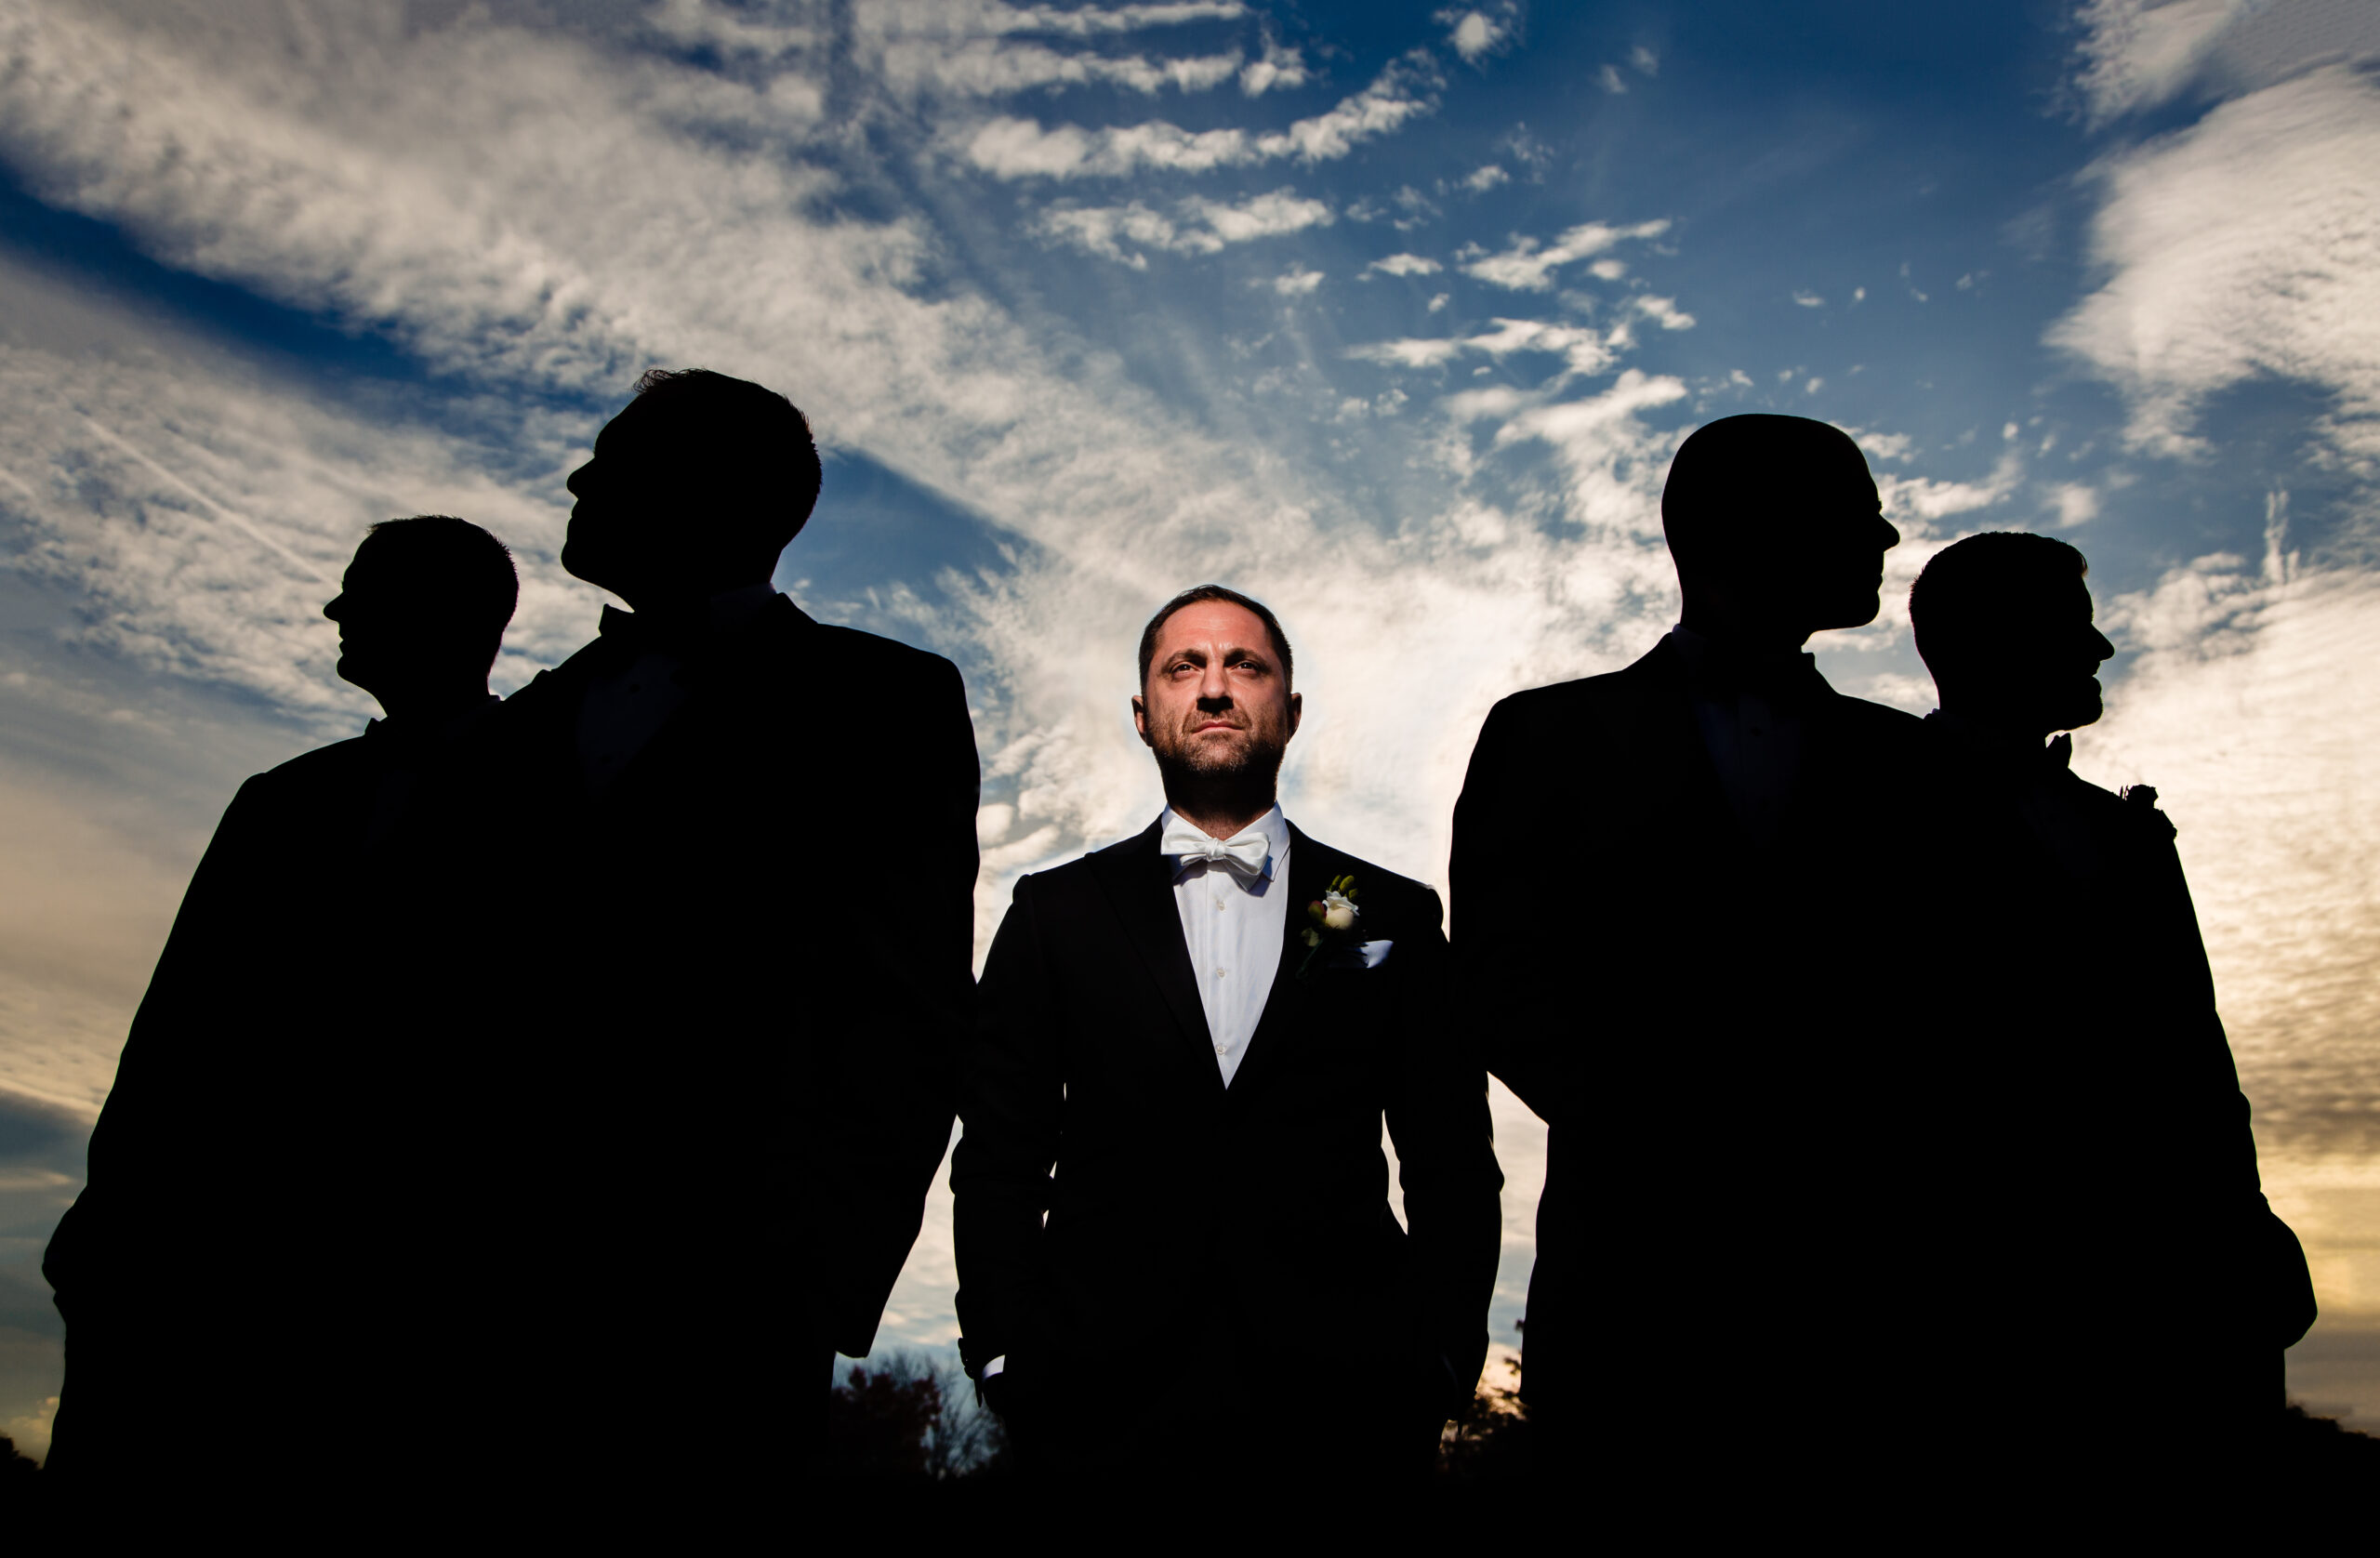 A group of groomsmen silhouetted against the sky, captured by New Jersey Wedding Photographer Jarot Bocanegra.